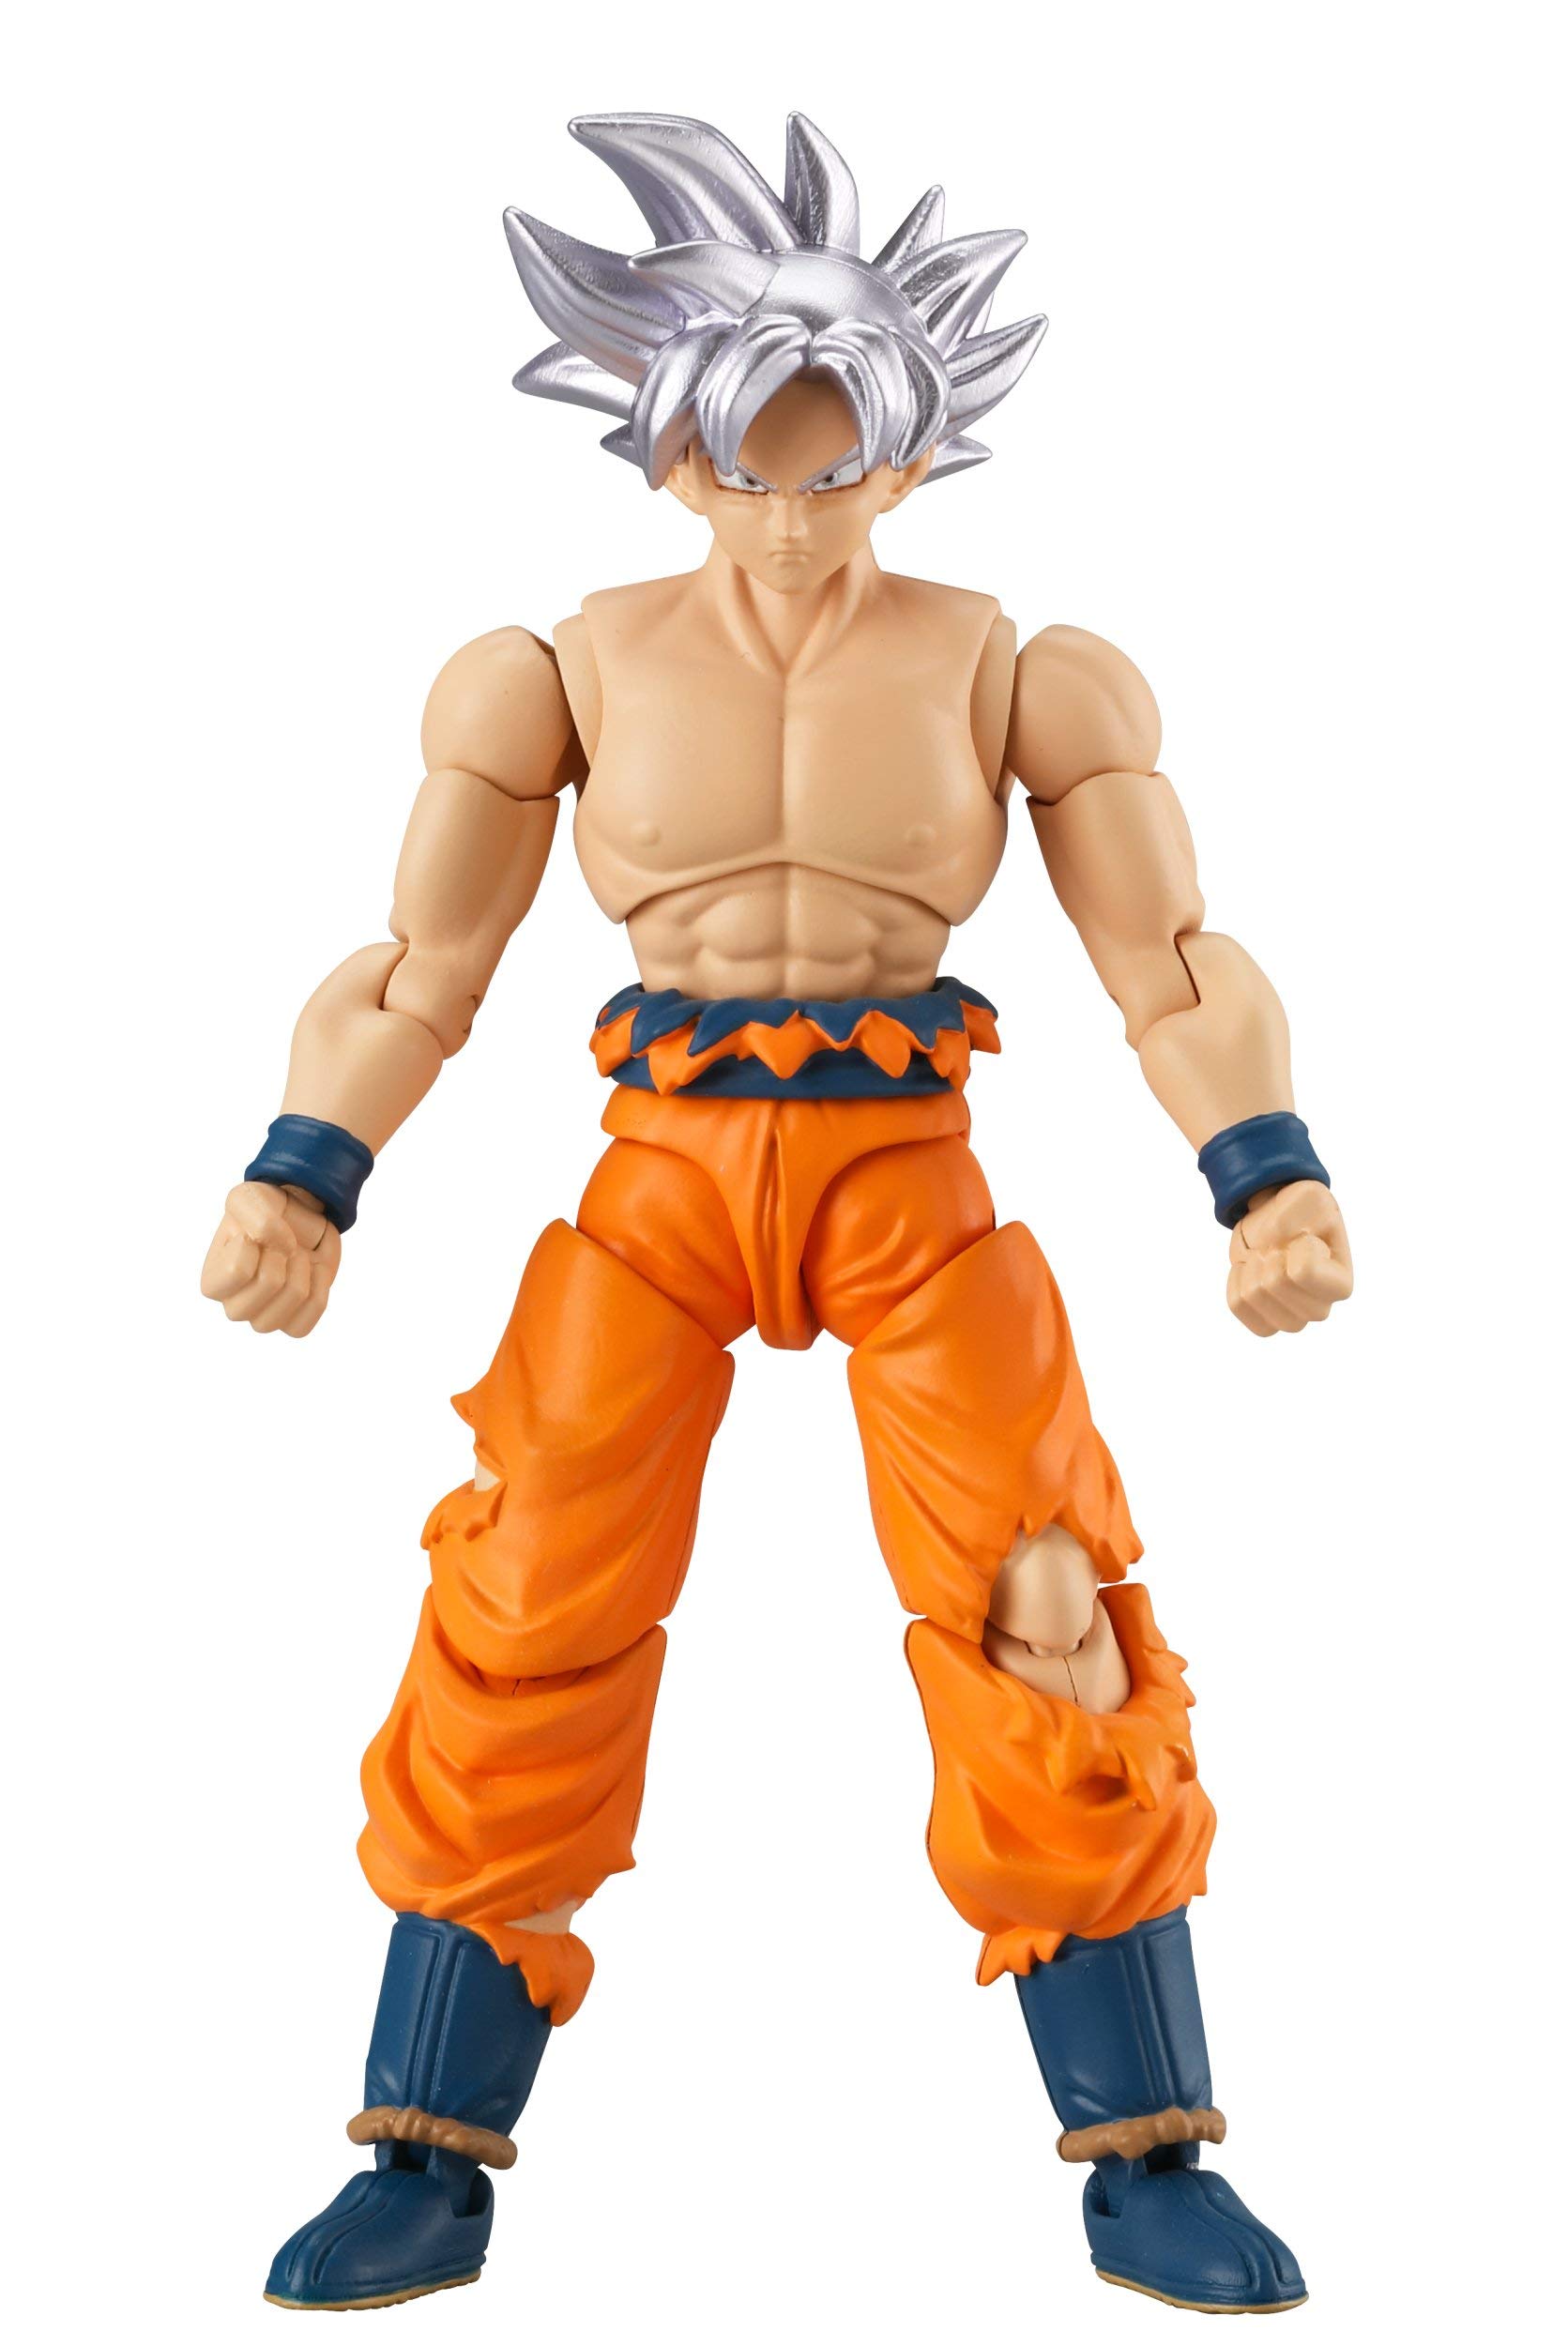 5" Dragon Ball Super Evolve 5 Goku Ultra Instinct Action Figure $7.49 + Free Shipping w/ Prime or on orders over $35